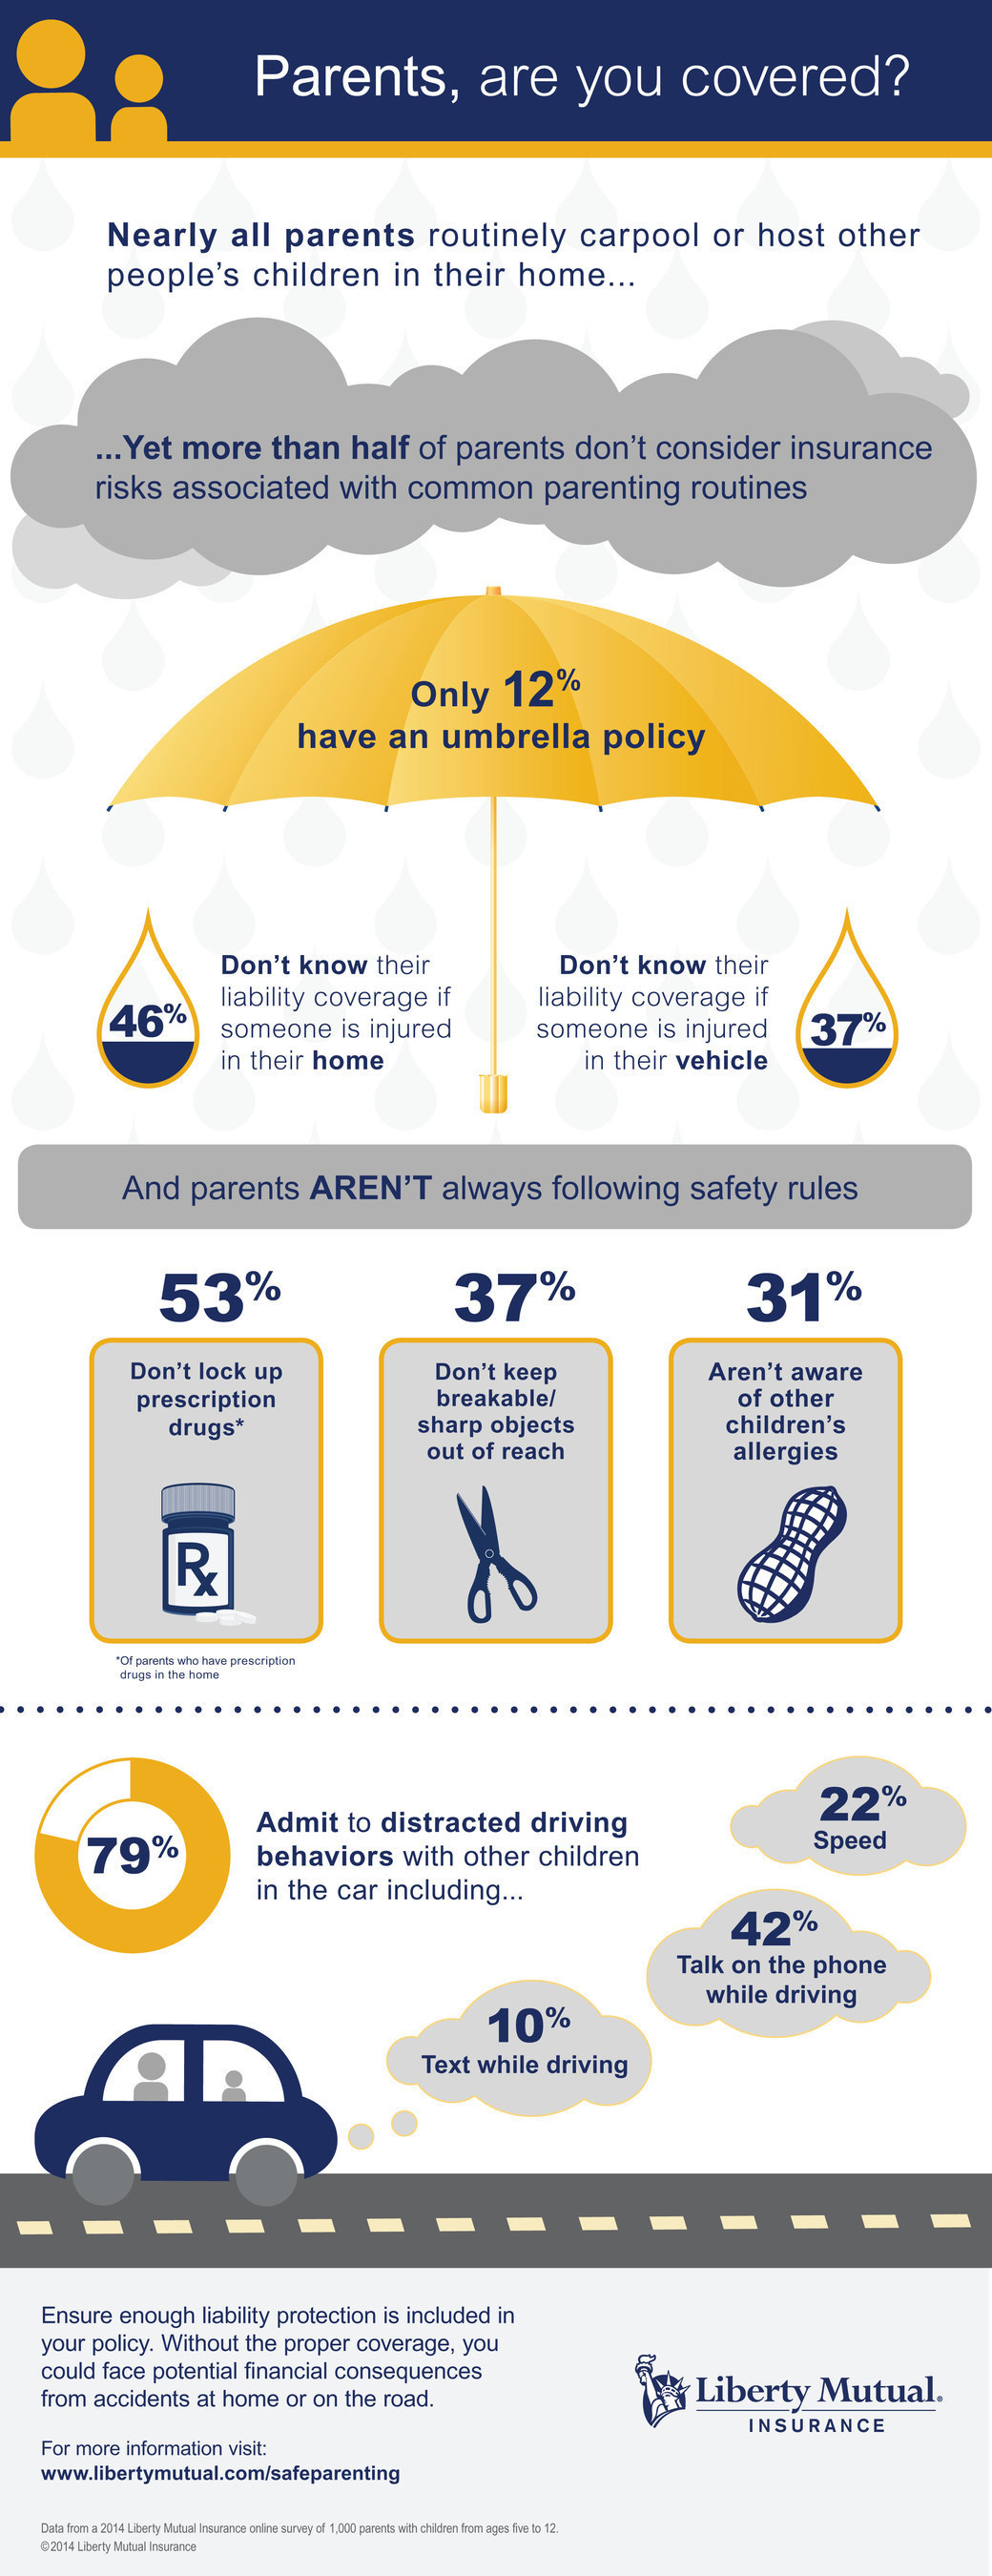 Most parents are unaware of liability insurance needs for their everyday routines, such as hosting play dates or driving carpools, according to a new study by Liberty Mutual Insurance.  Many parents admit to not practicing common home and auto safety measures, yet only 12 percent say they have an umbrella policy to provide excess liability coverage in the event an accident occurs in their home or on the road.  Visit www.libertymutual.com/safeparenting for safety and coverage information.